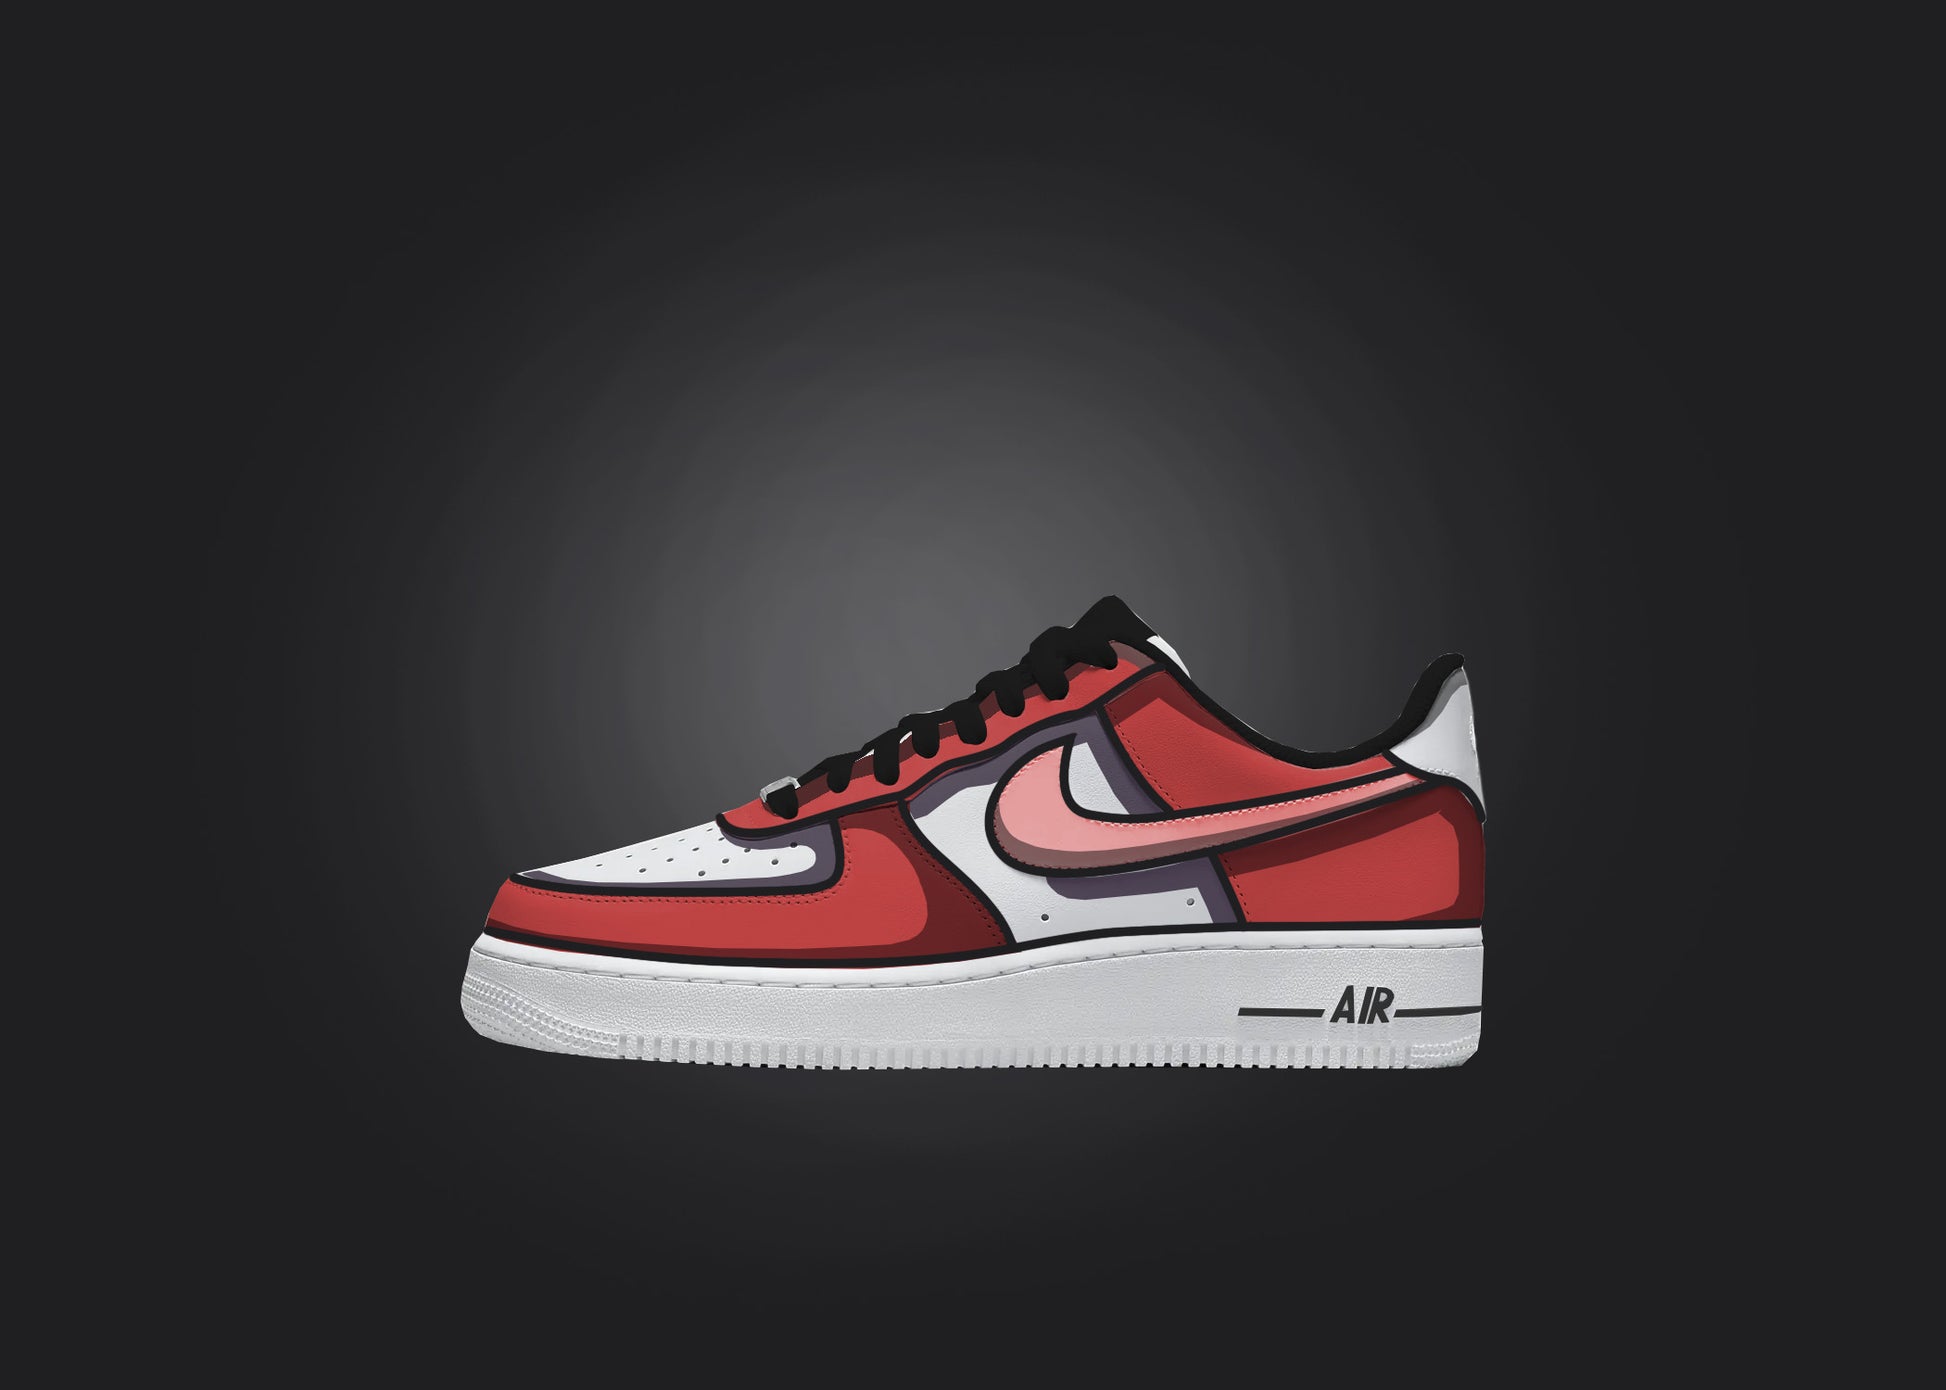 Single red and white Custom Air Force 1 sneaker displayed against a black background, accentuating the intricate cartoon shading details.